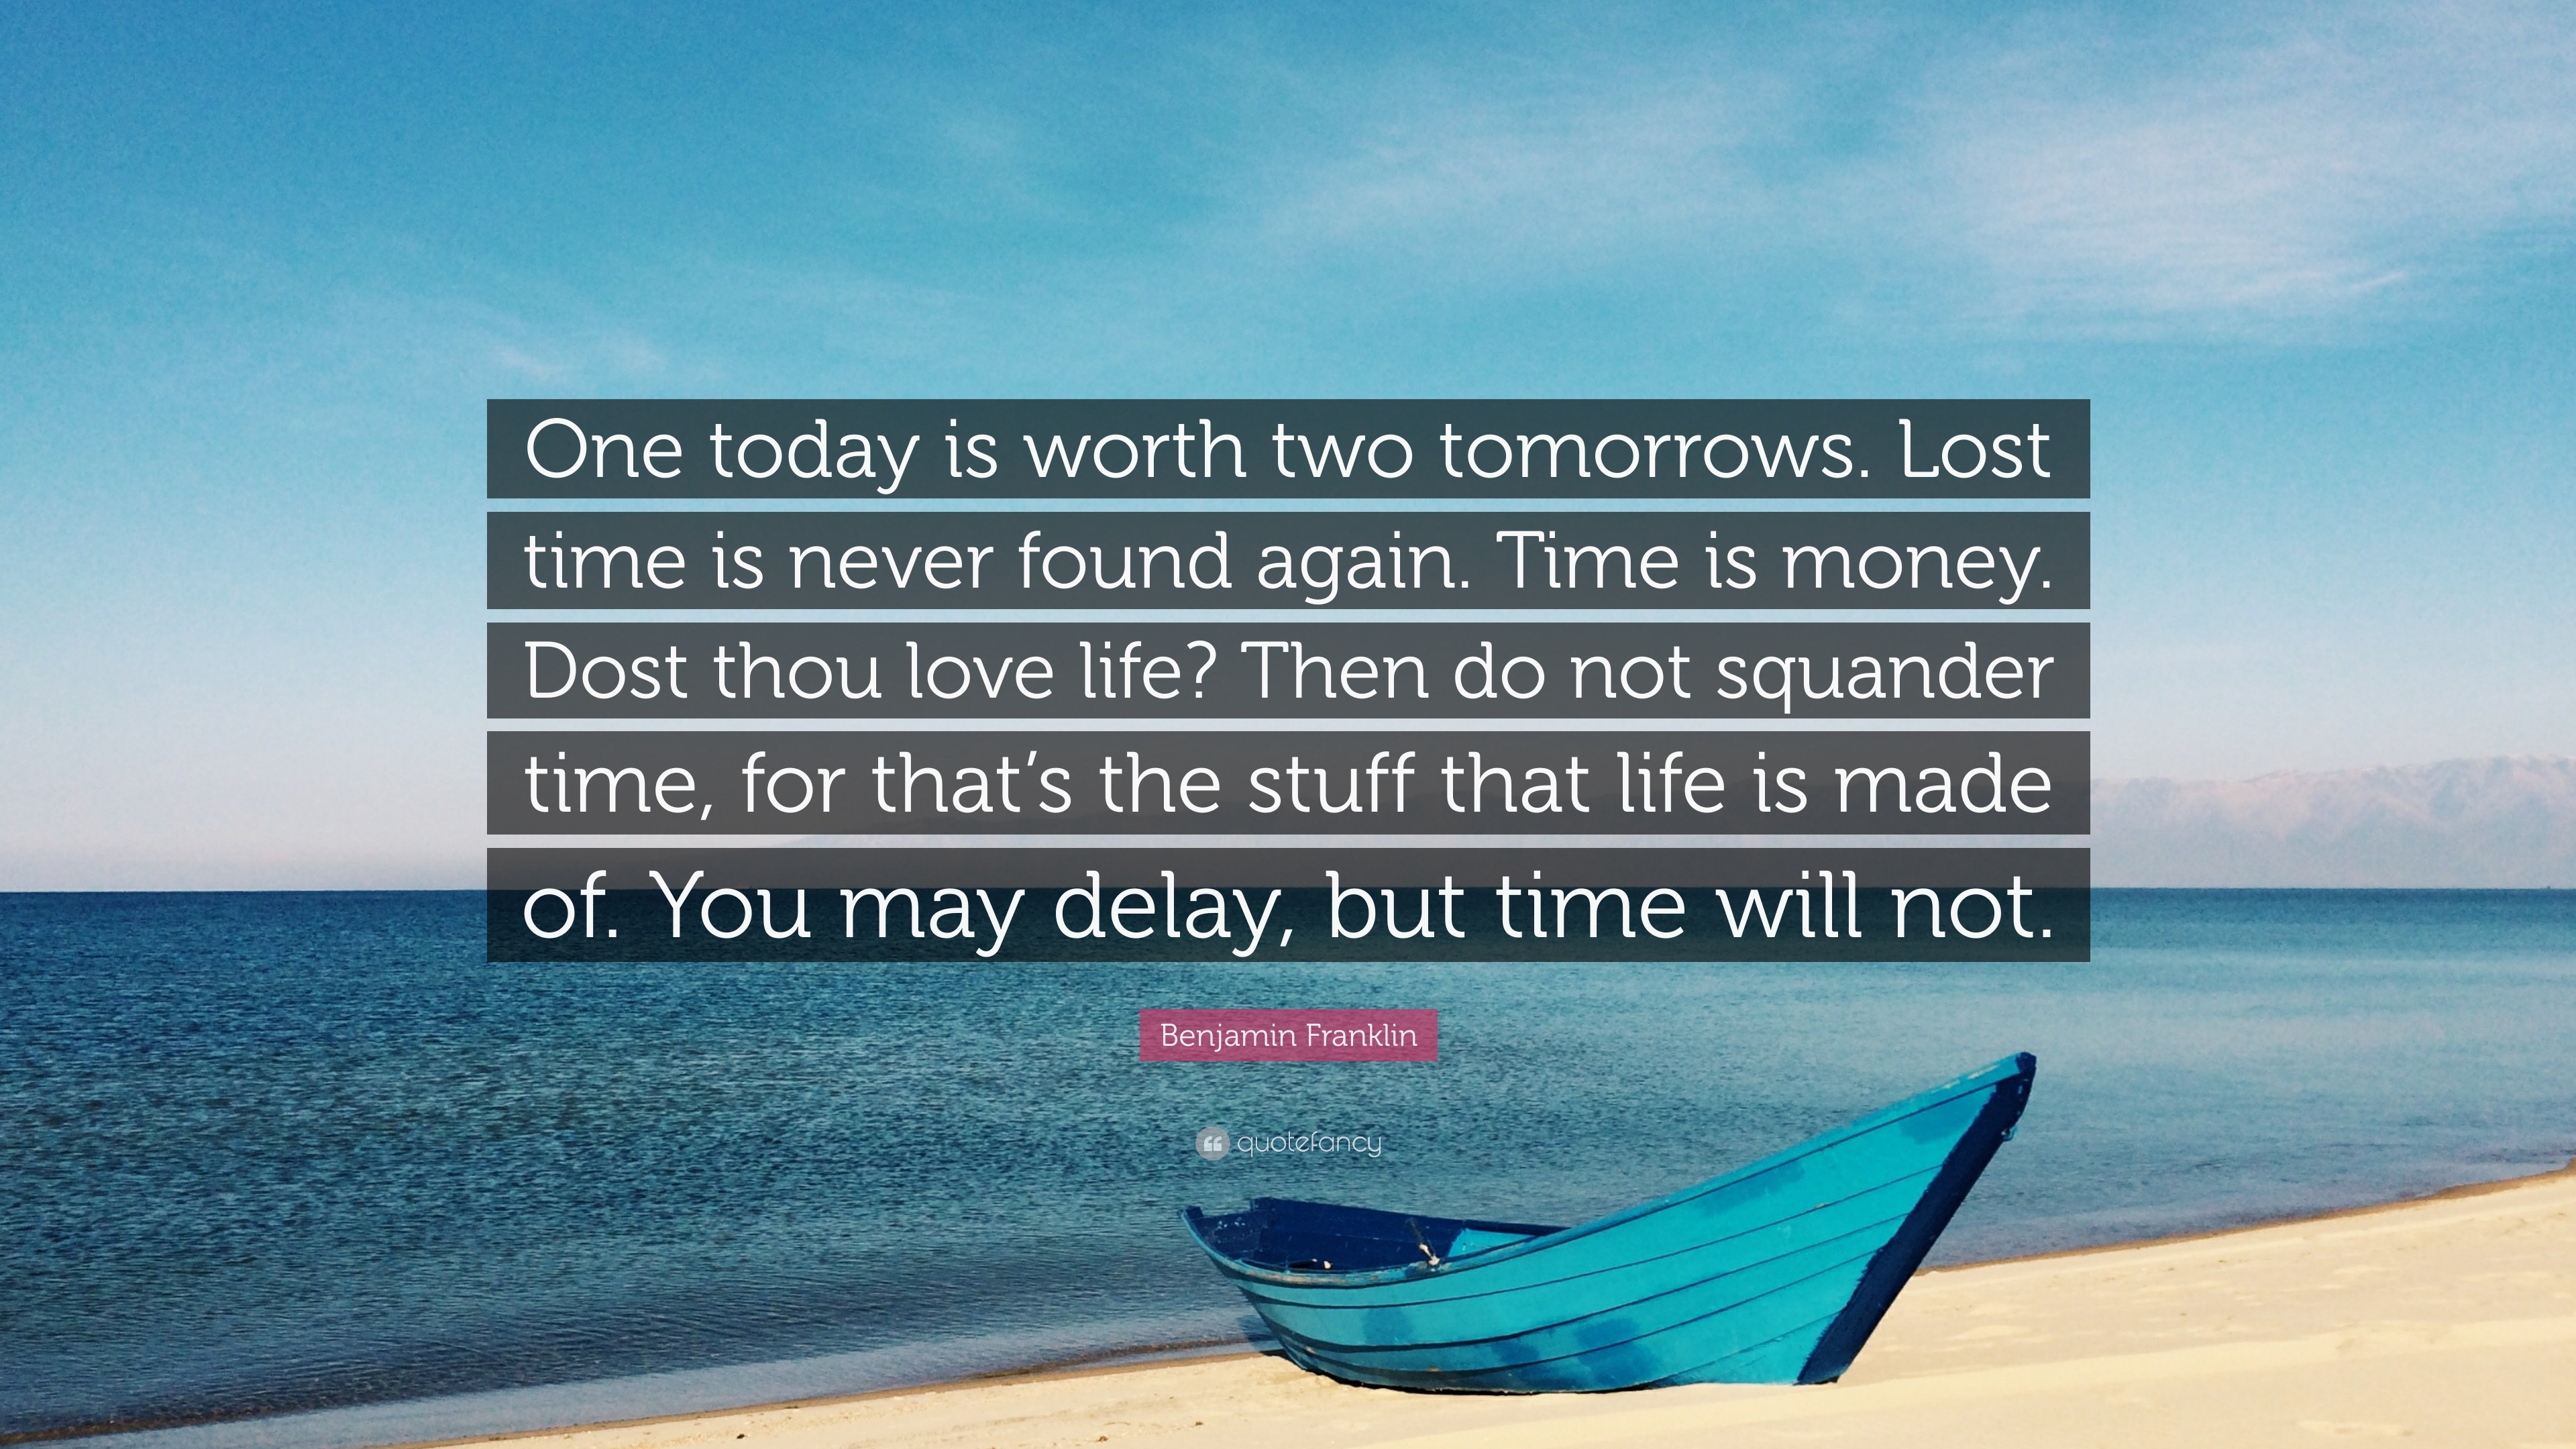 Benjamin Franklin Quote: “One today is worth two tomorrows. Lost time is never  found again. Time is money. Dost thou love life? Then do not squand...”